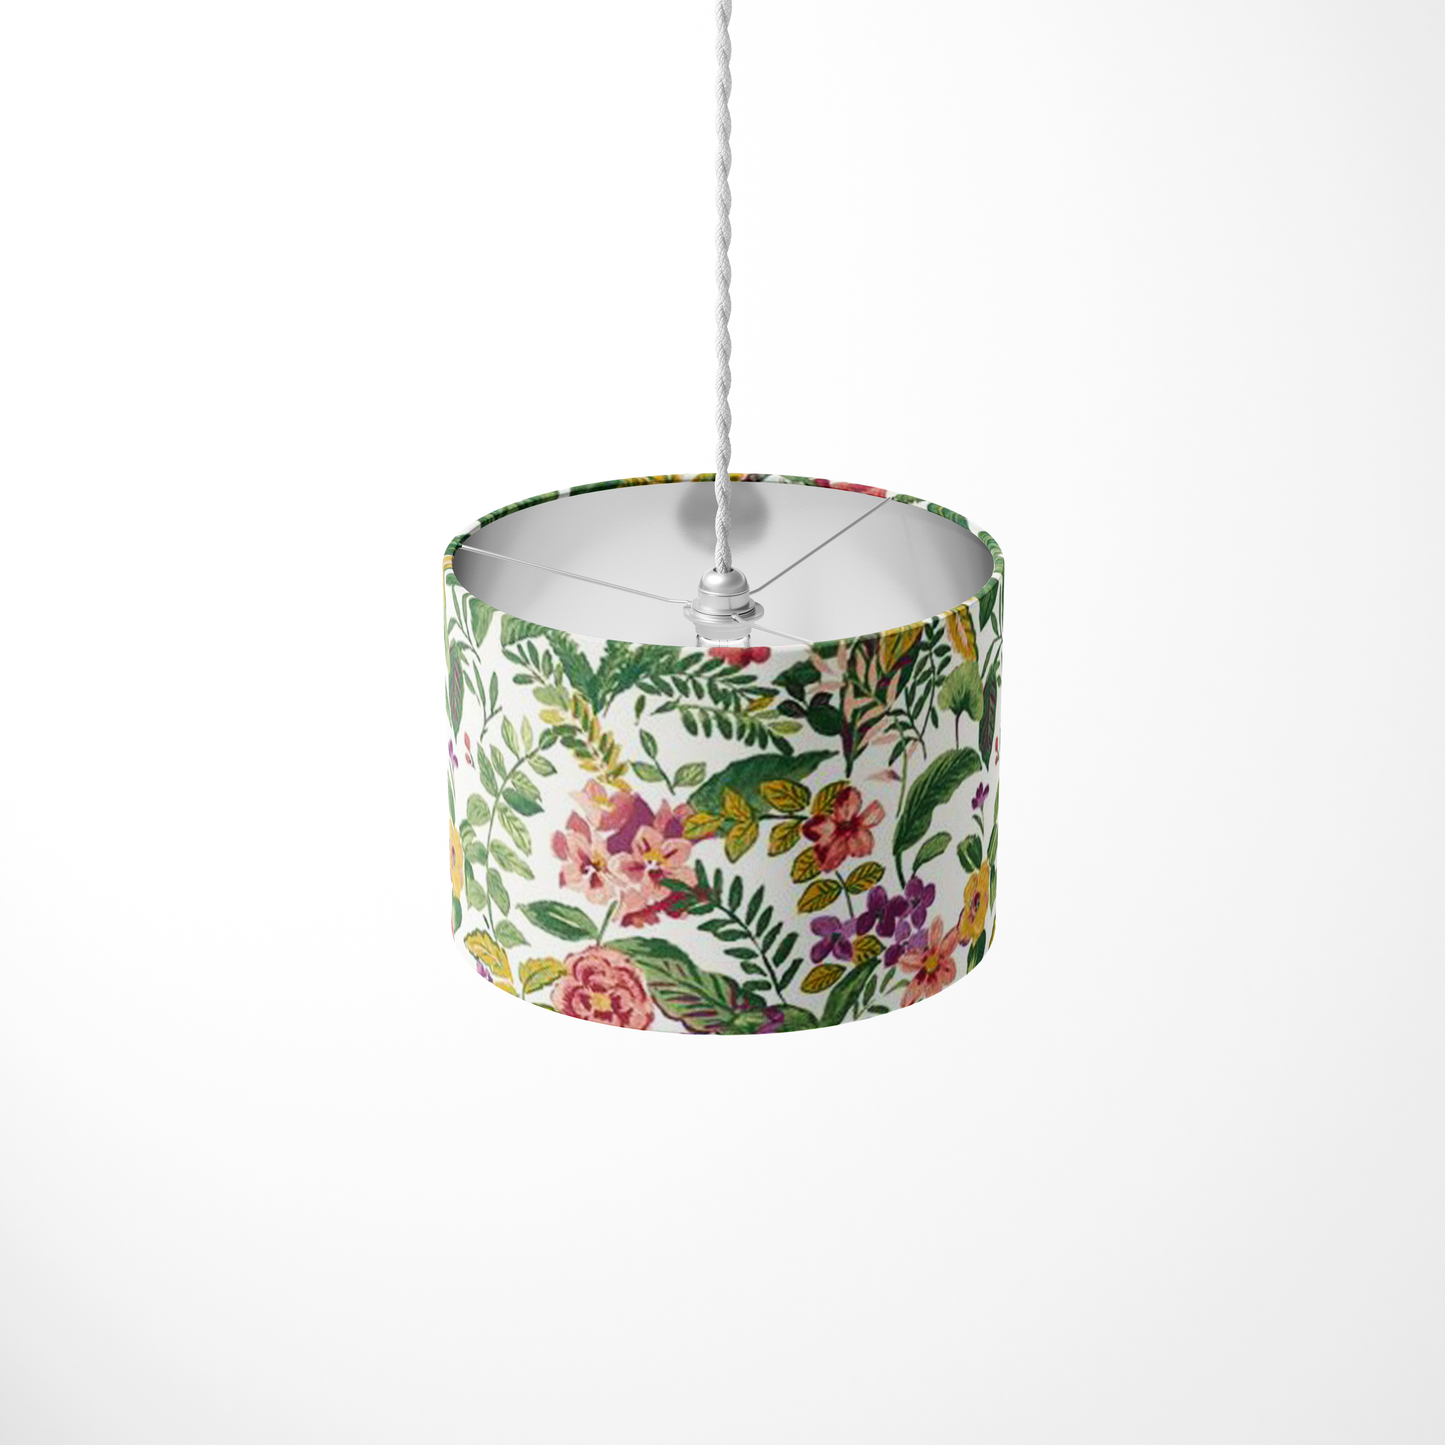 F&B Posy Floral and Tropical Bird Print Lamp Shade Handmade in Yorkshire